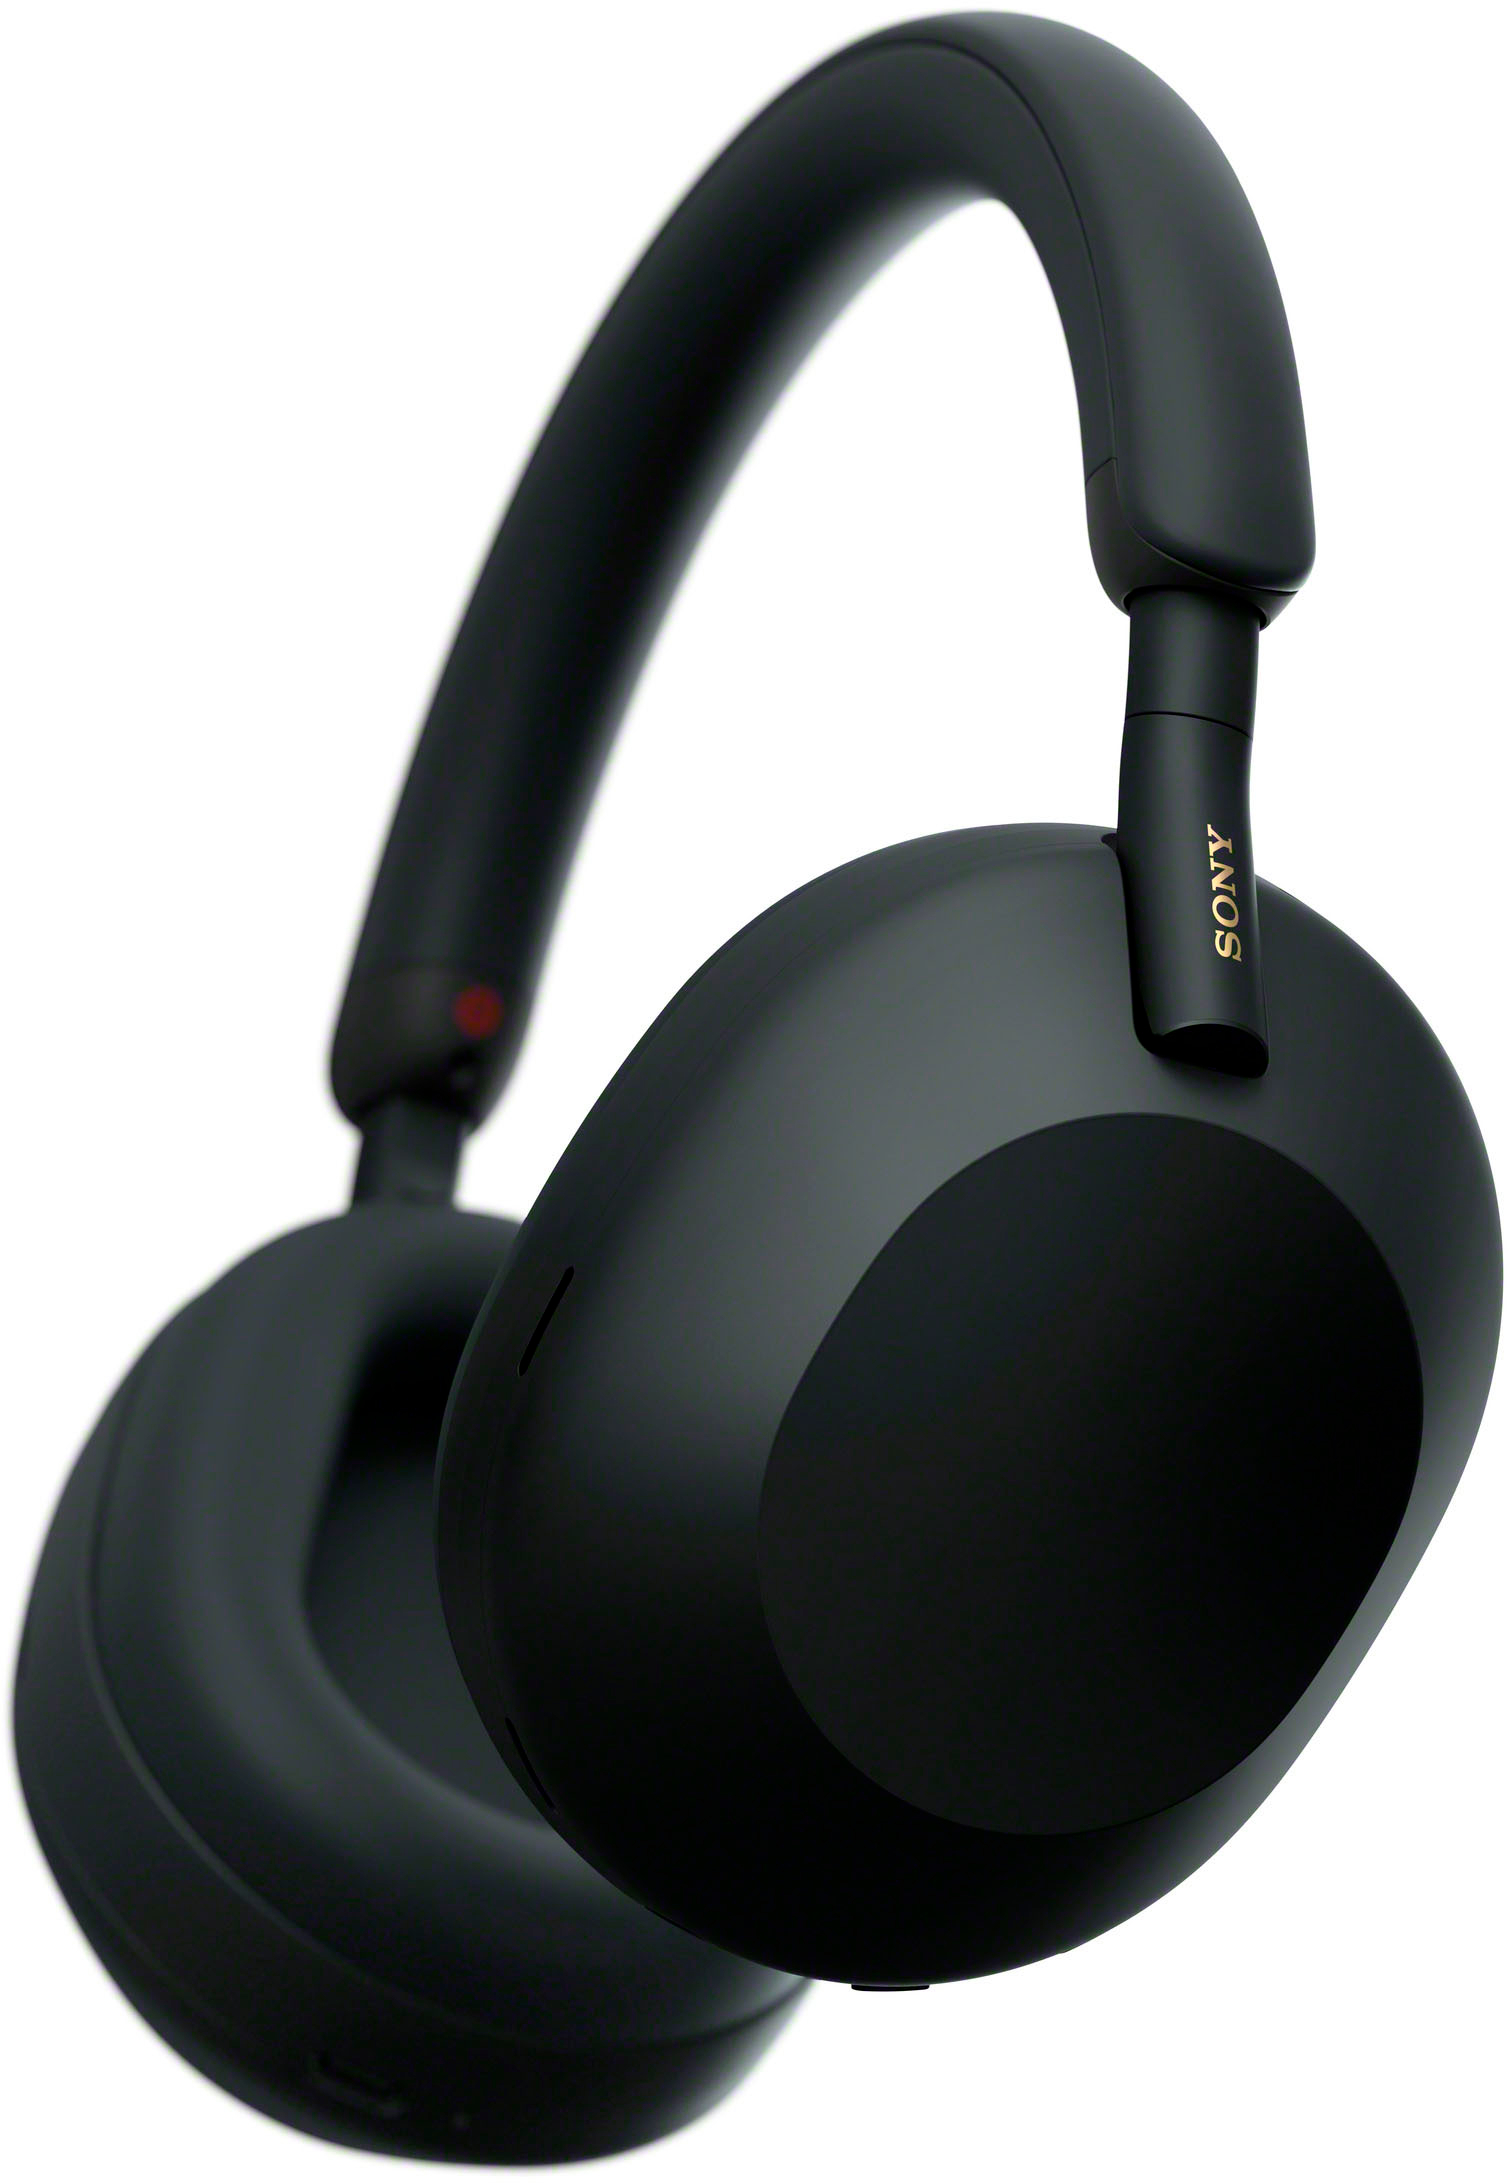 Sony WH-1000XM5 Wireless Noise-Canceling Over-the-Ear Headphones Black  WH-1000XM5/B - Best Buy